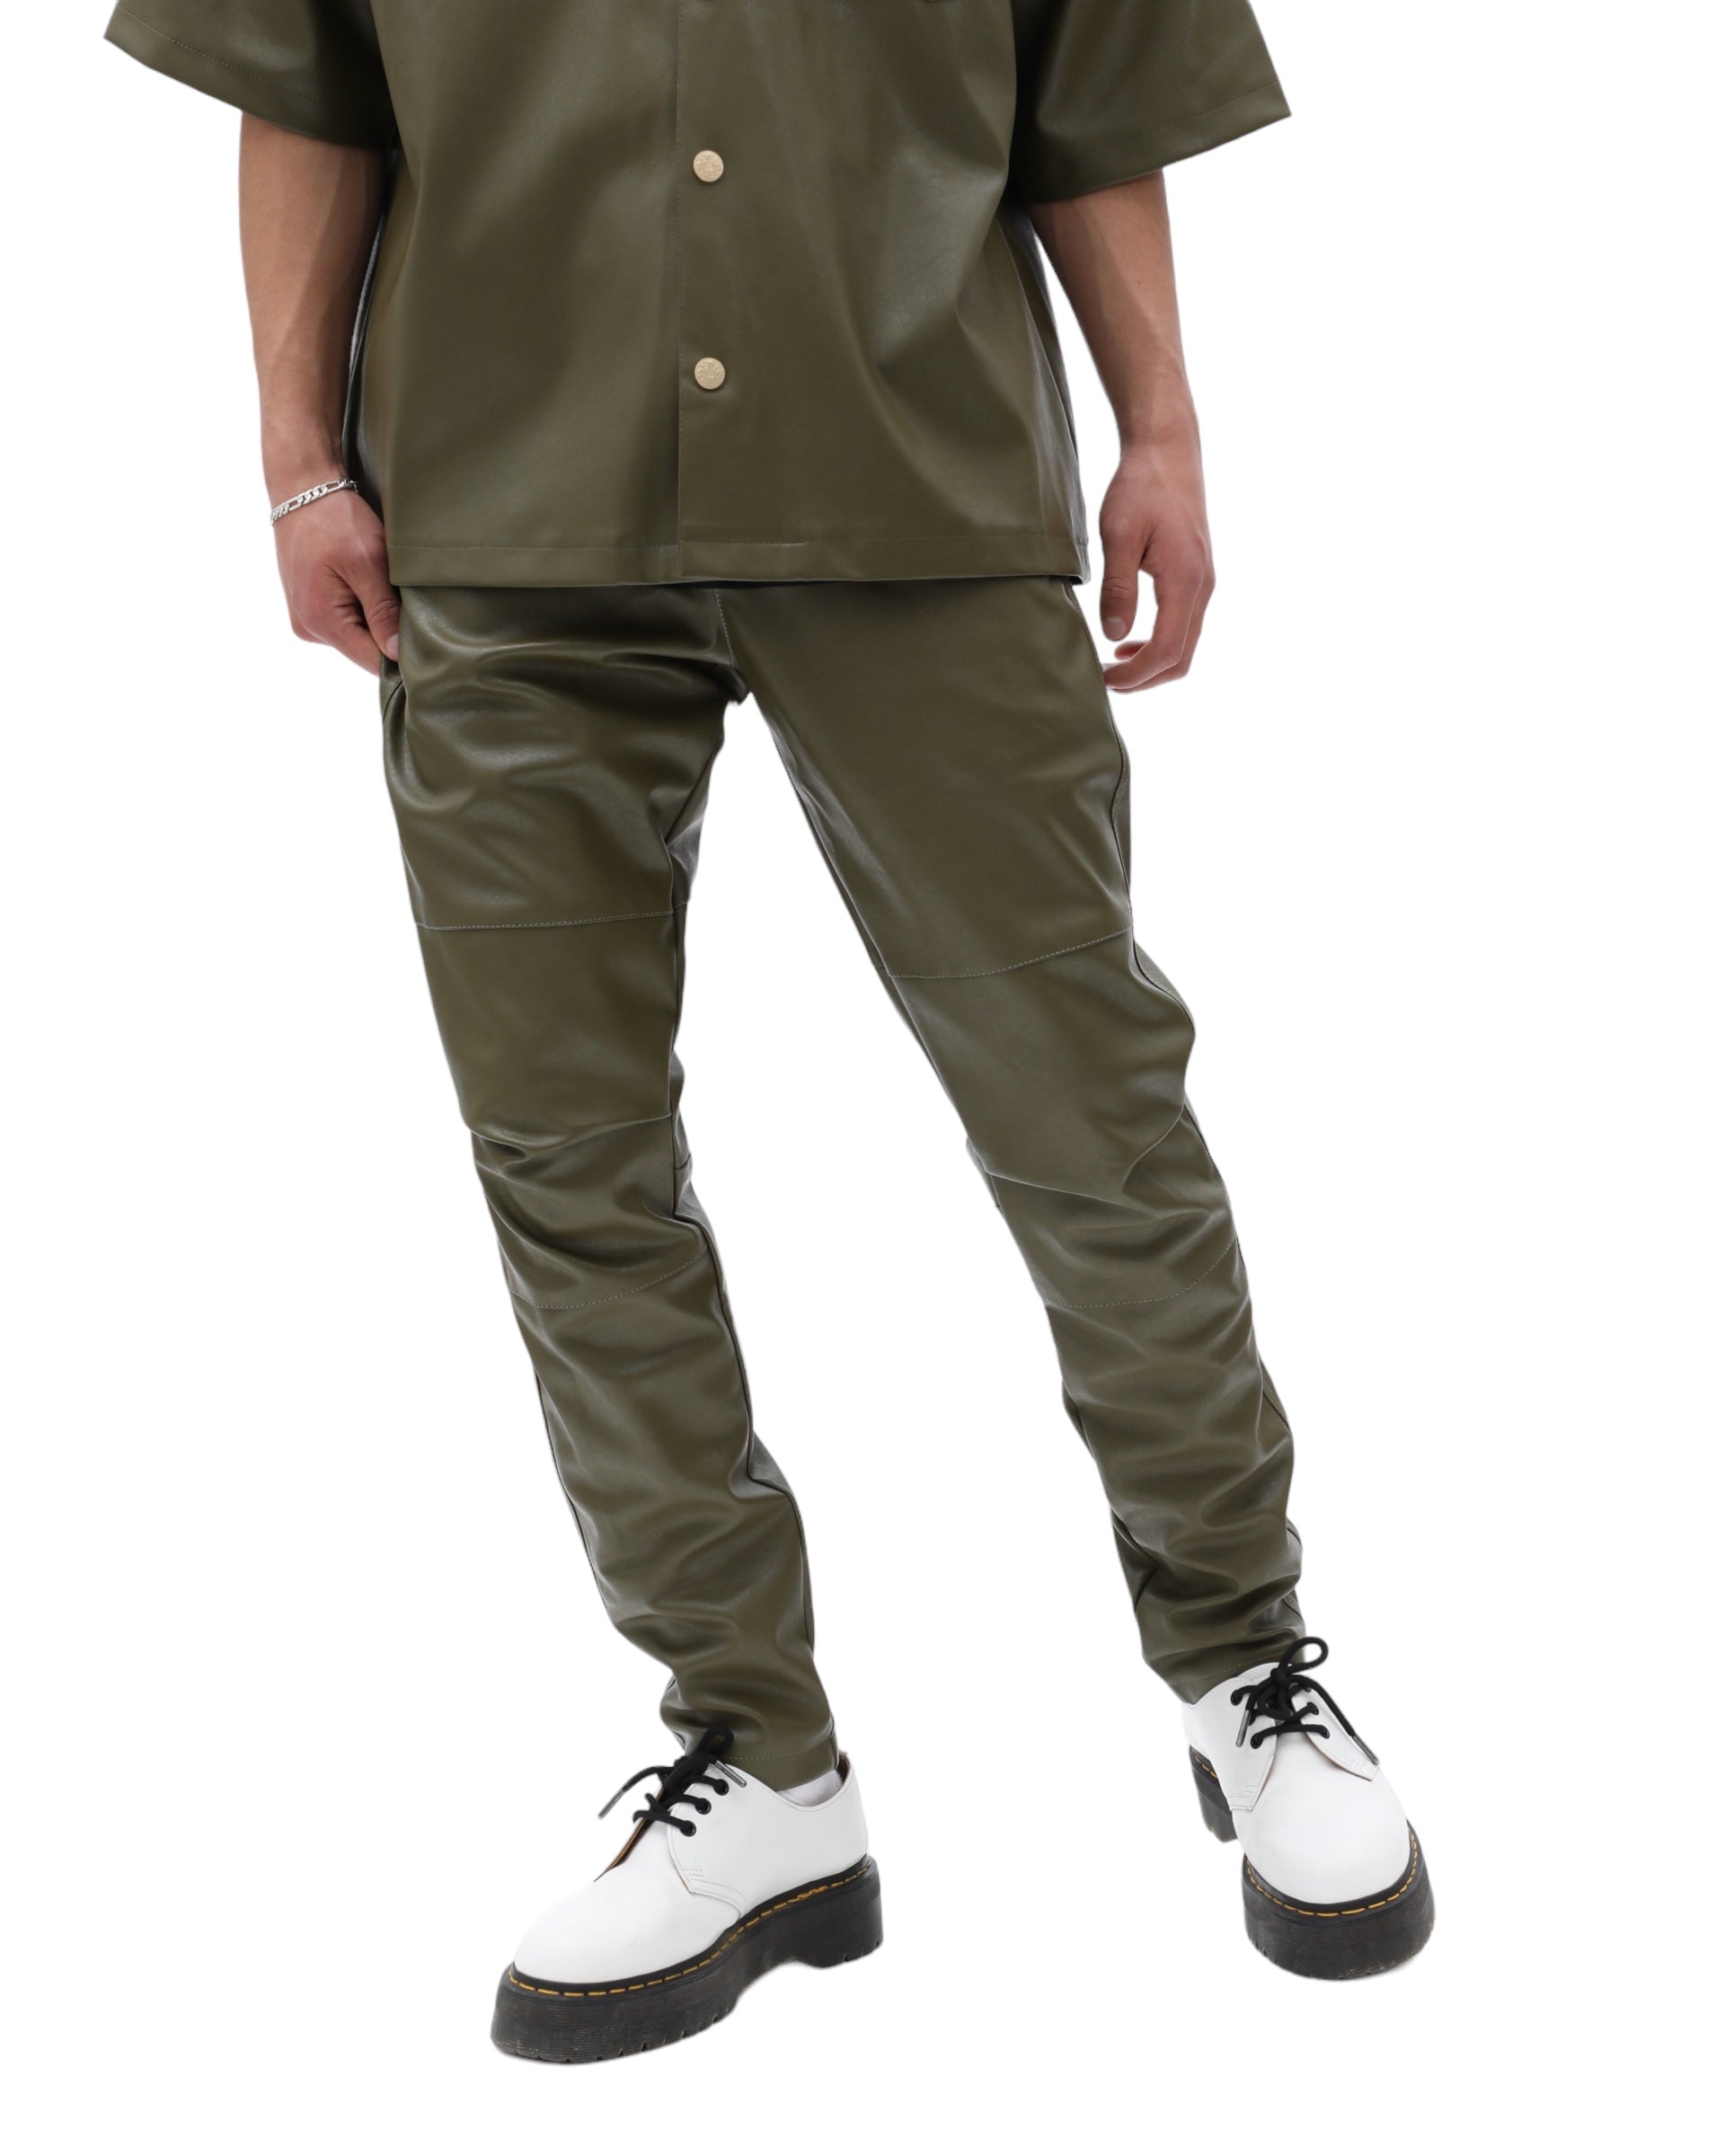 Olive Green Leather Pants